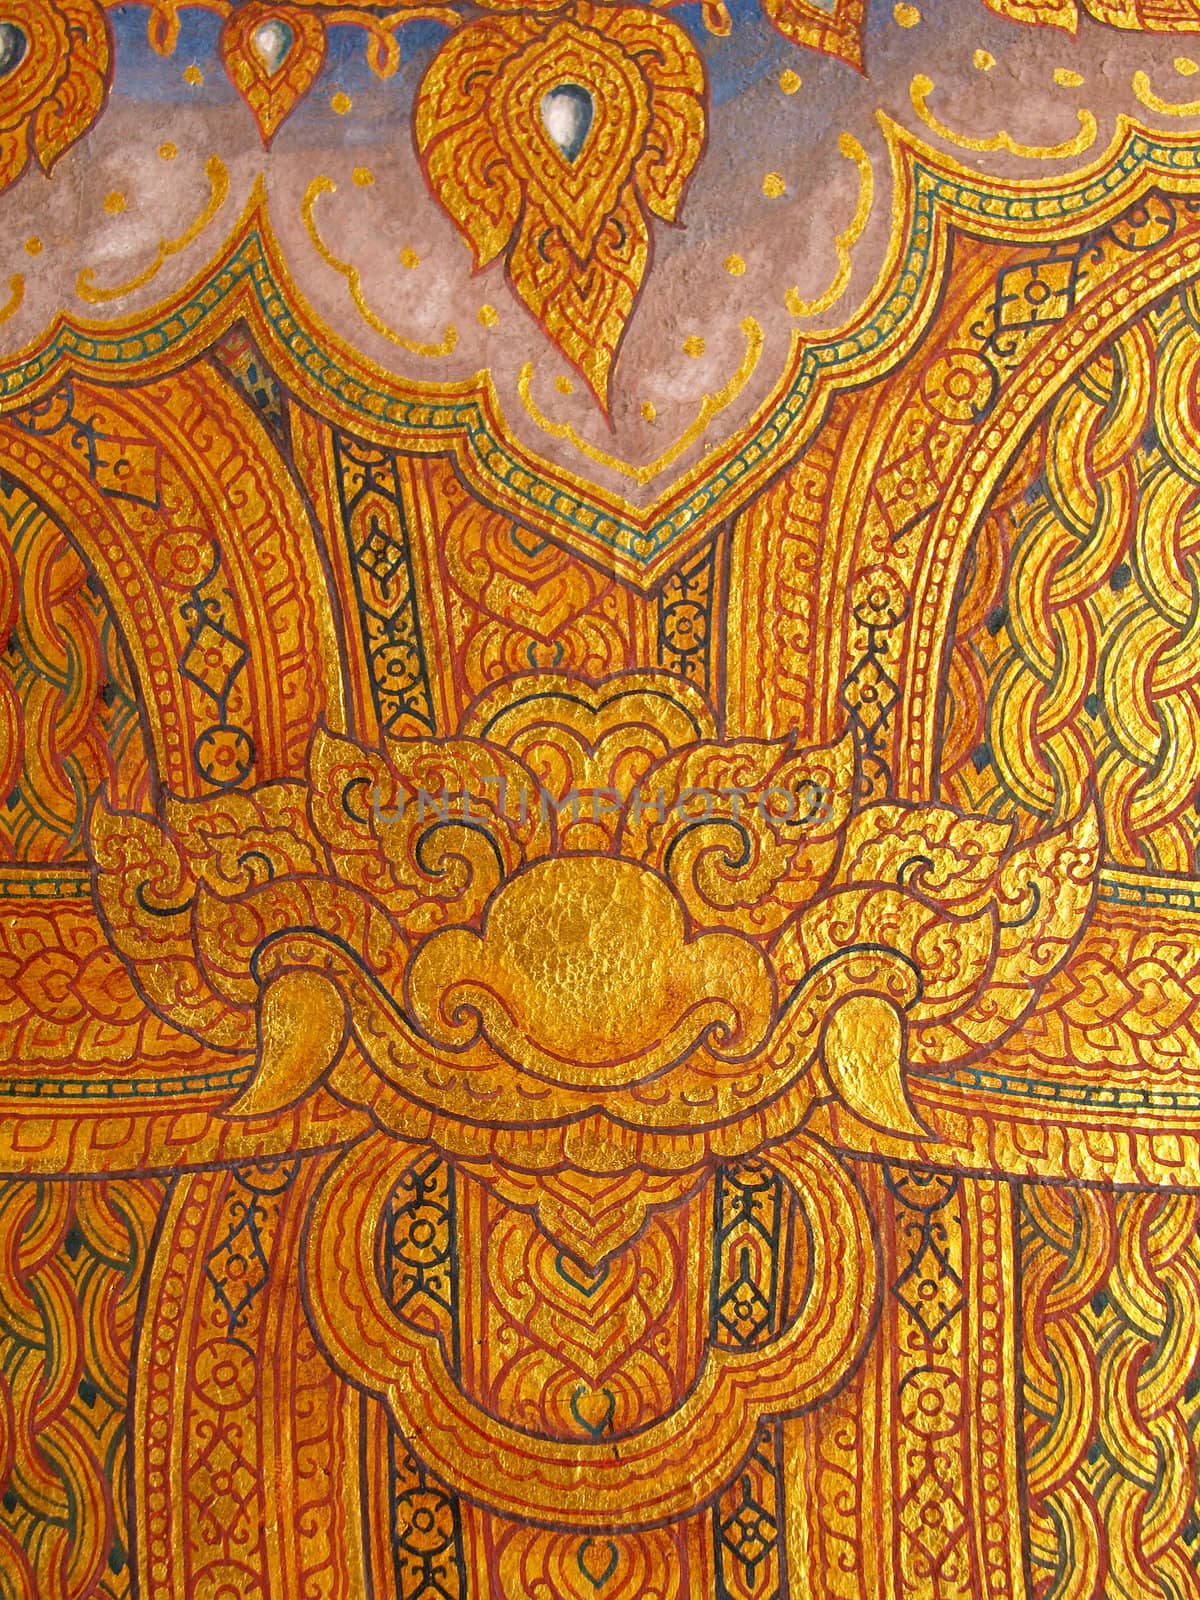 Wall art painting and texture in temple Thailand. painting about Ramayana epic story.